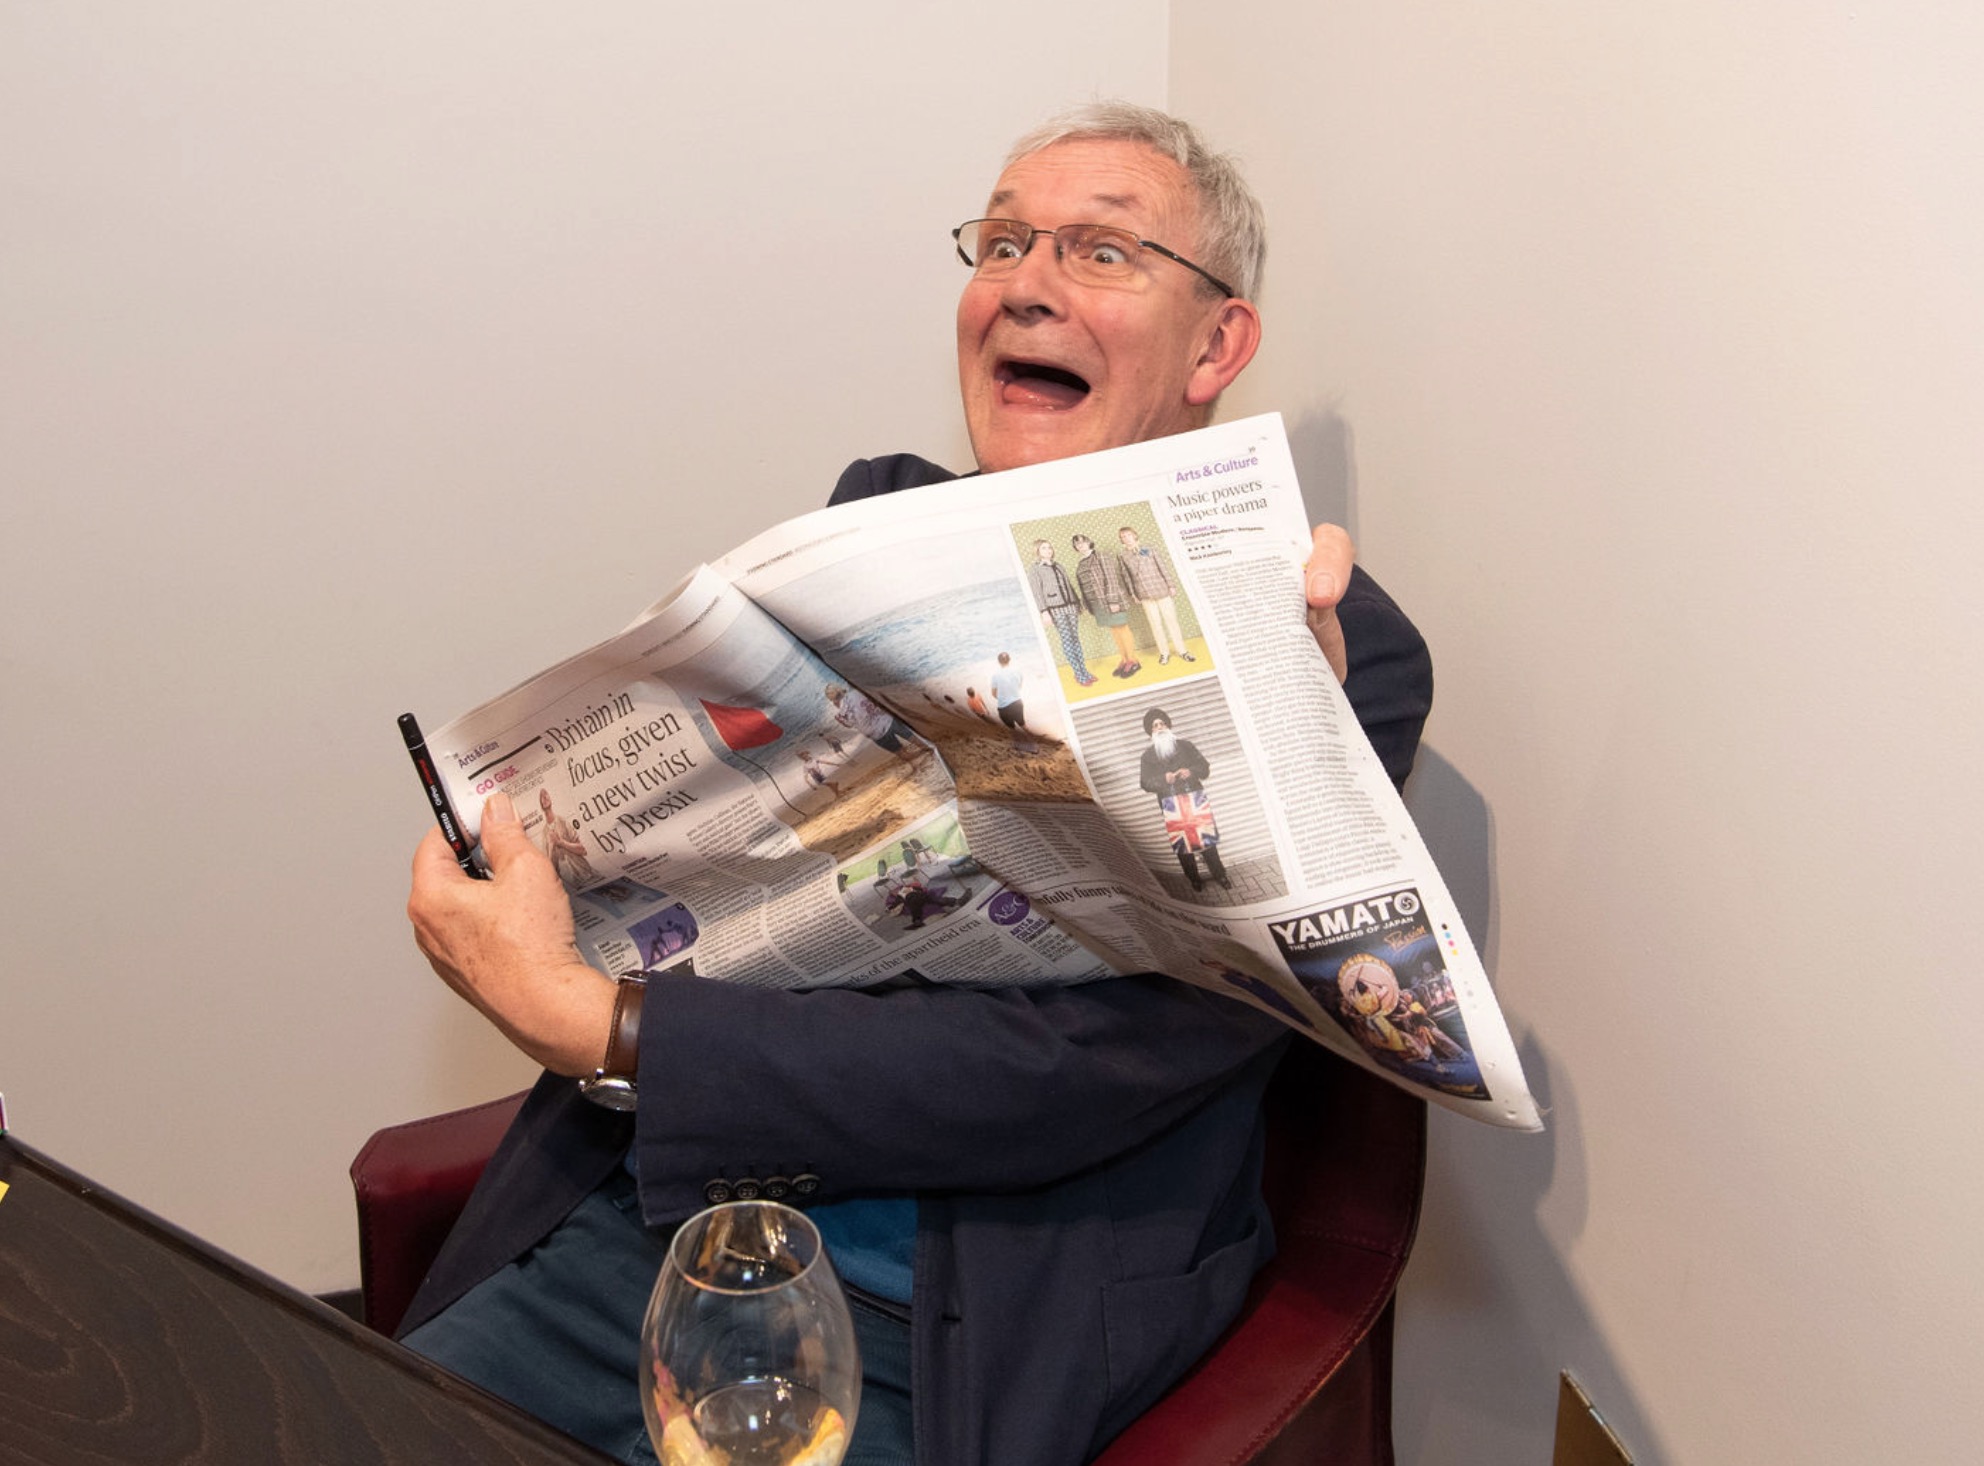 Martin reads his latest reviews - they're all good! Photograph by James Mason